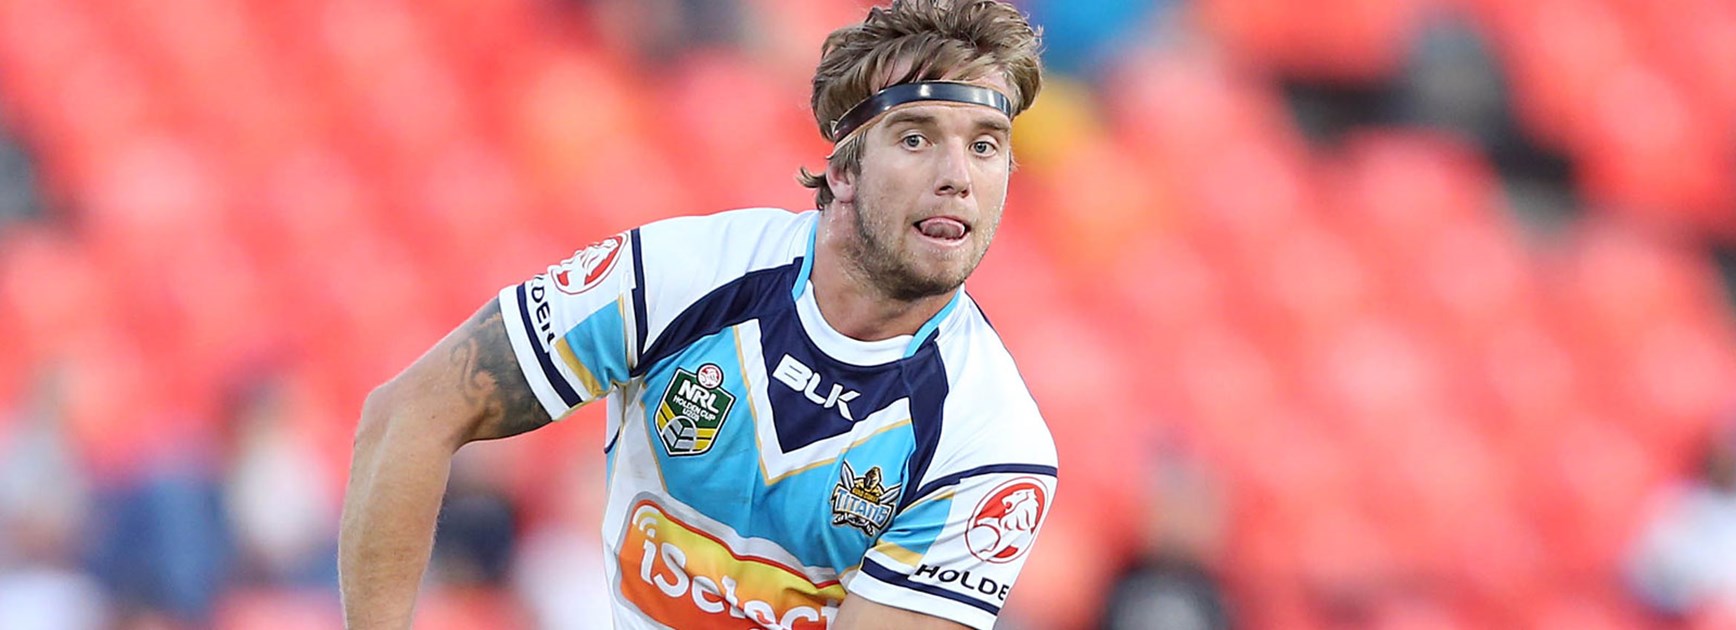 2014 NYC Player of the Year Kane Elgey will make his NRL debut for the Titans in Round 4.